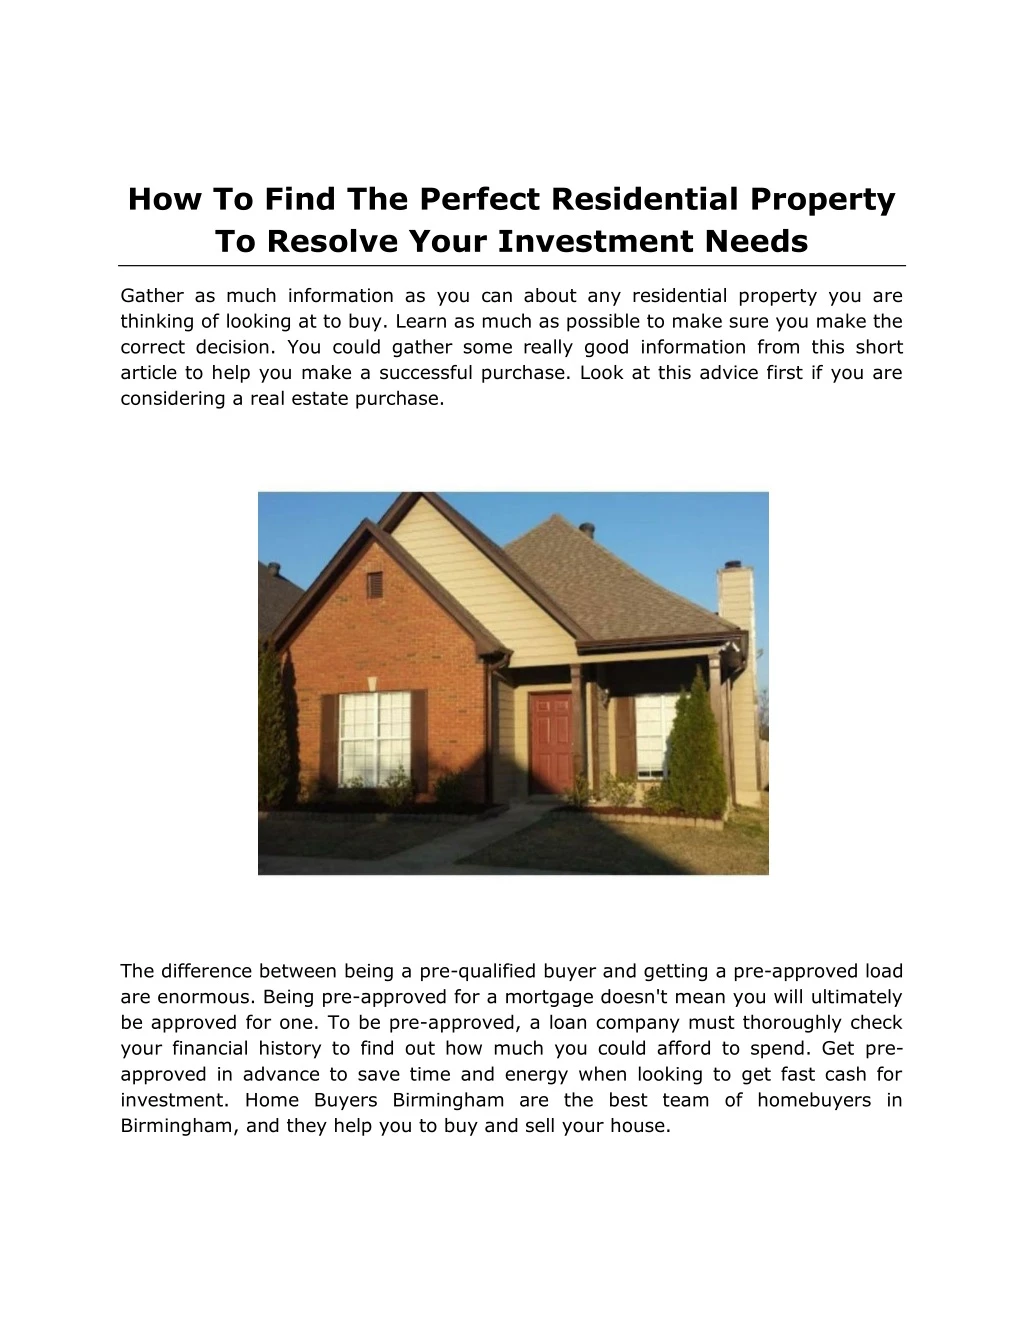 how to find the perfect residential property